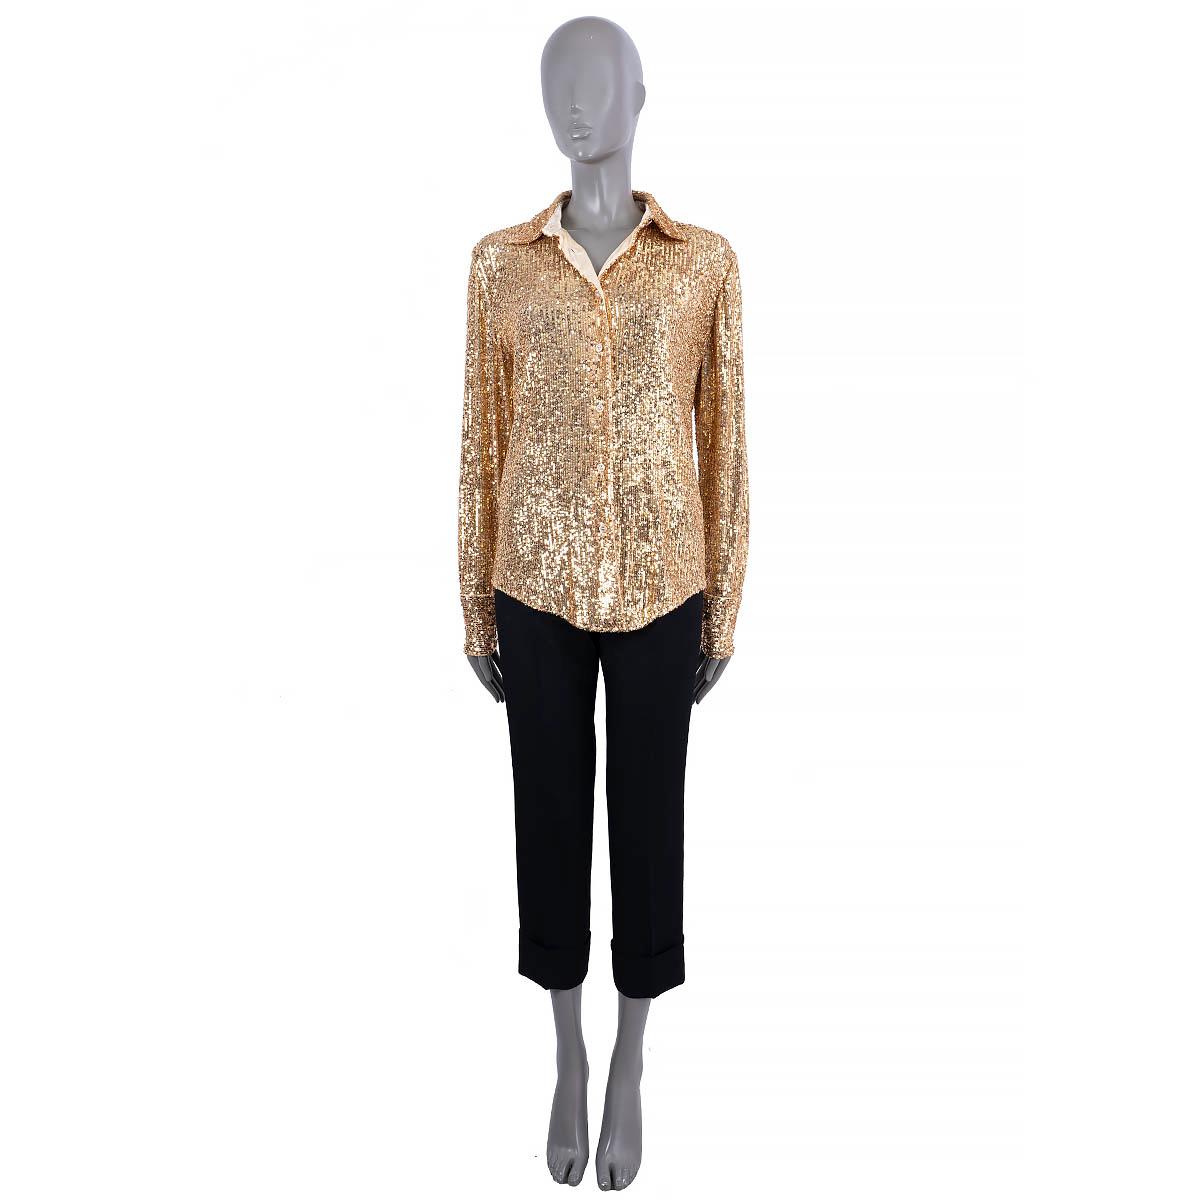 100% authentic Tom Ford sequin shirt in gold polyester (100%). Features long sleeves with buttoned cuffs. Closes with buttons in the front. Lined in silk (94%) and elastane (6%). Has been worn and is in excellent condition. 

Measurements
Tag